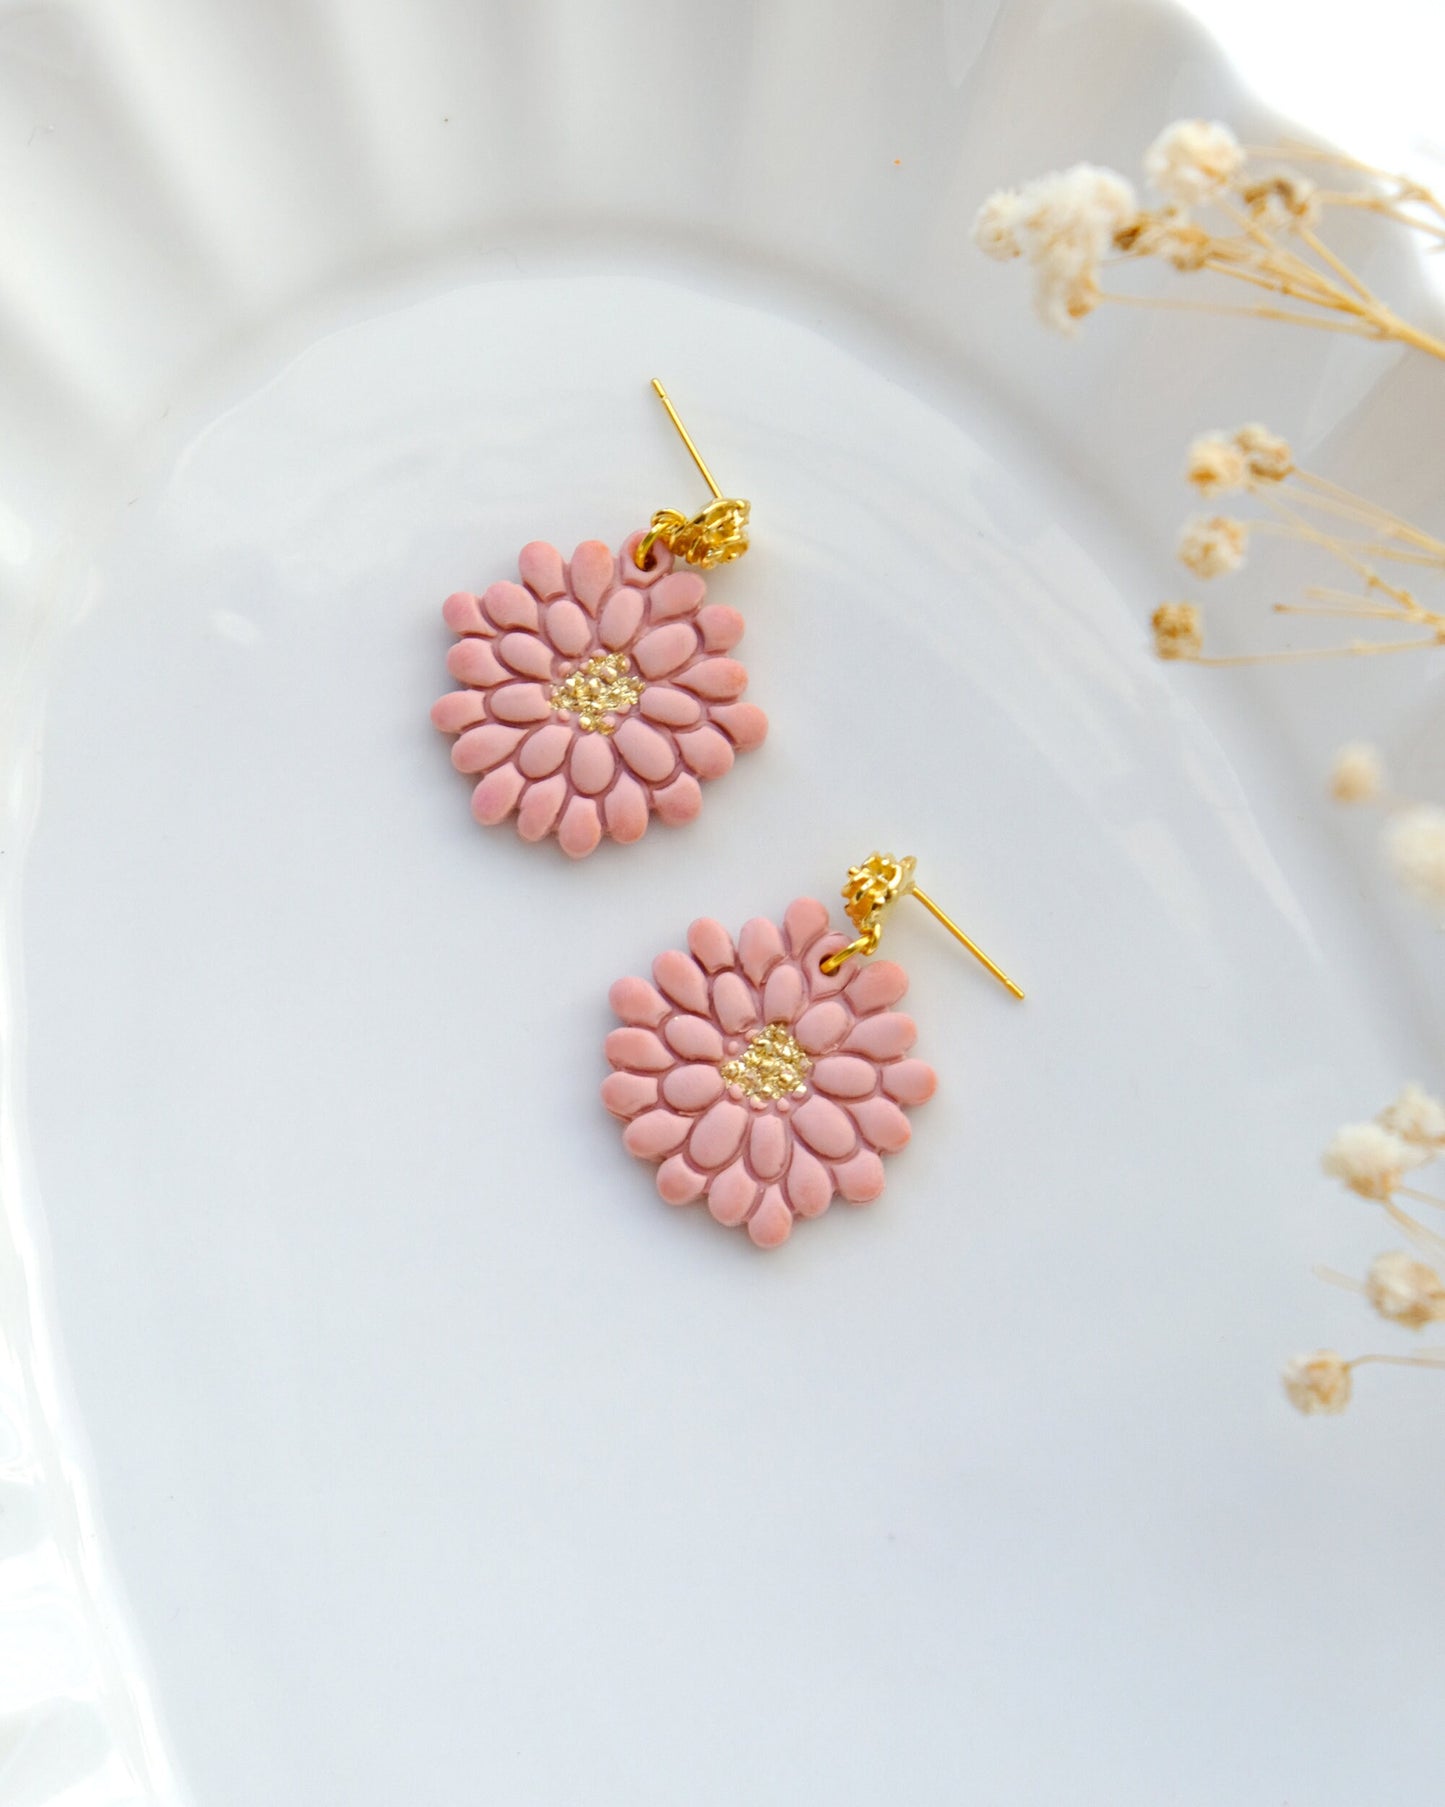 Spring Flower Polymer Clay Cutter | Floral Clay Cutters | Spring Clay Cutters for Earring Making | Clay Tools